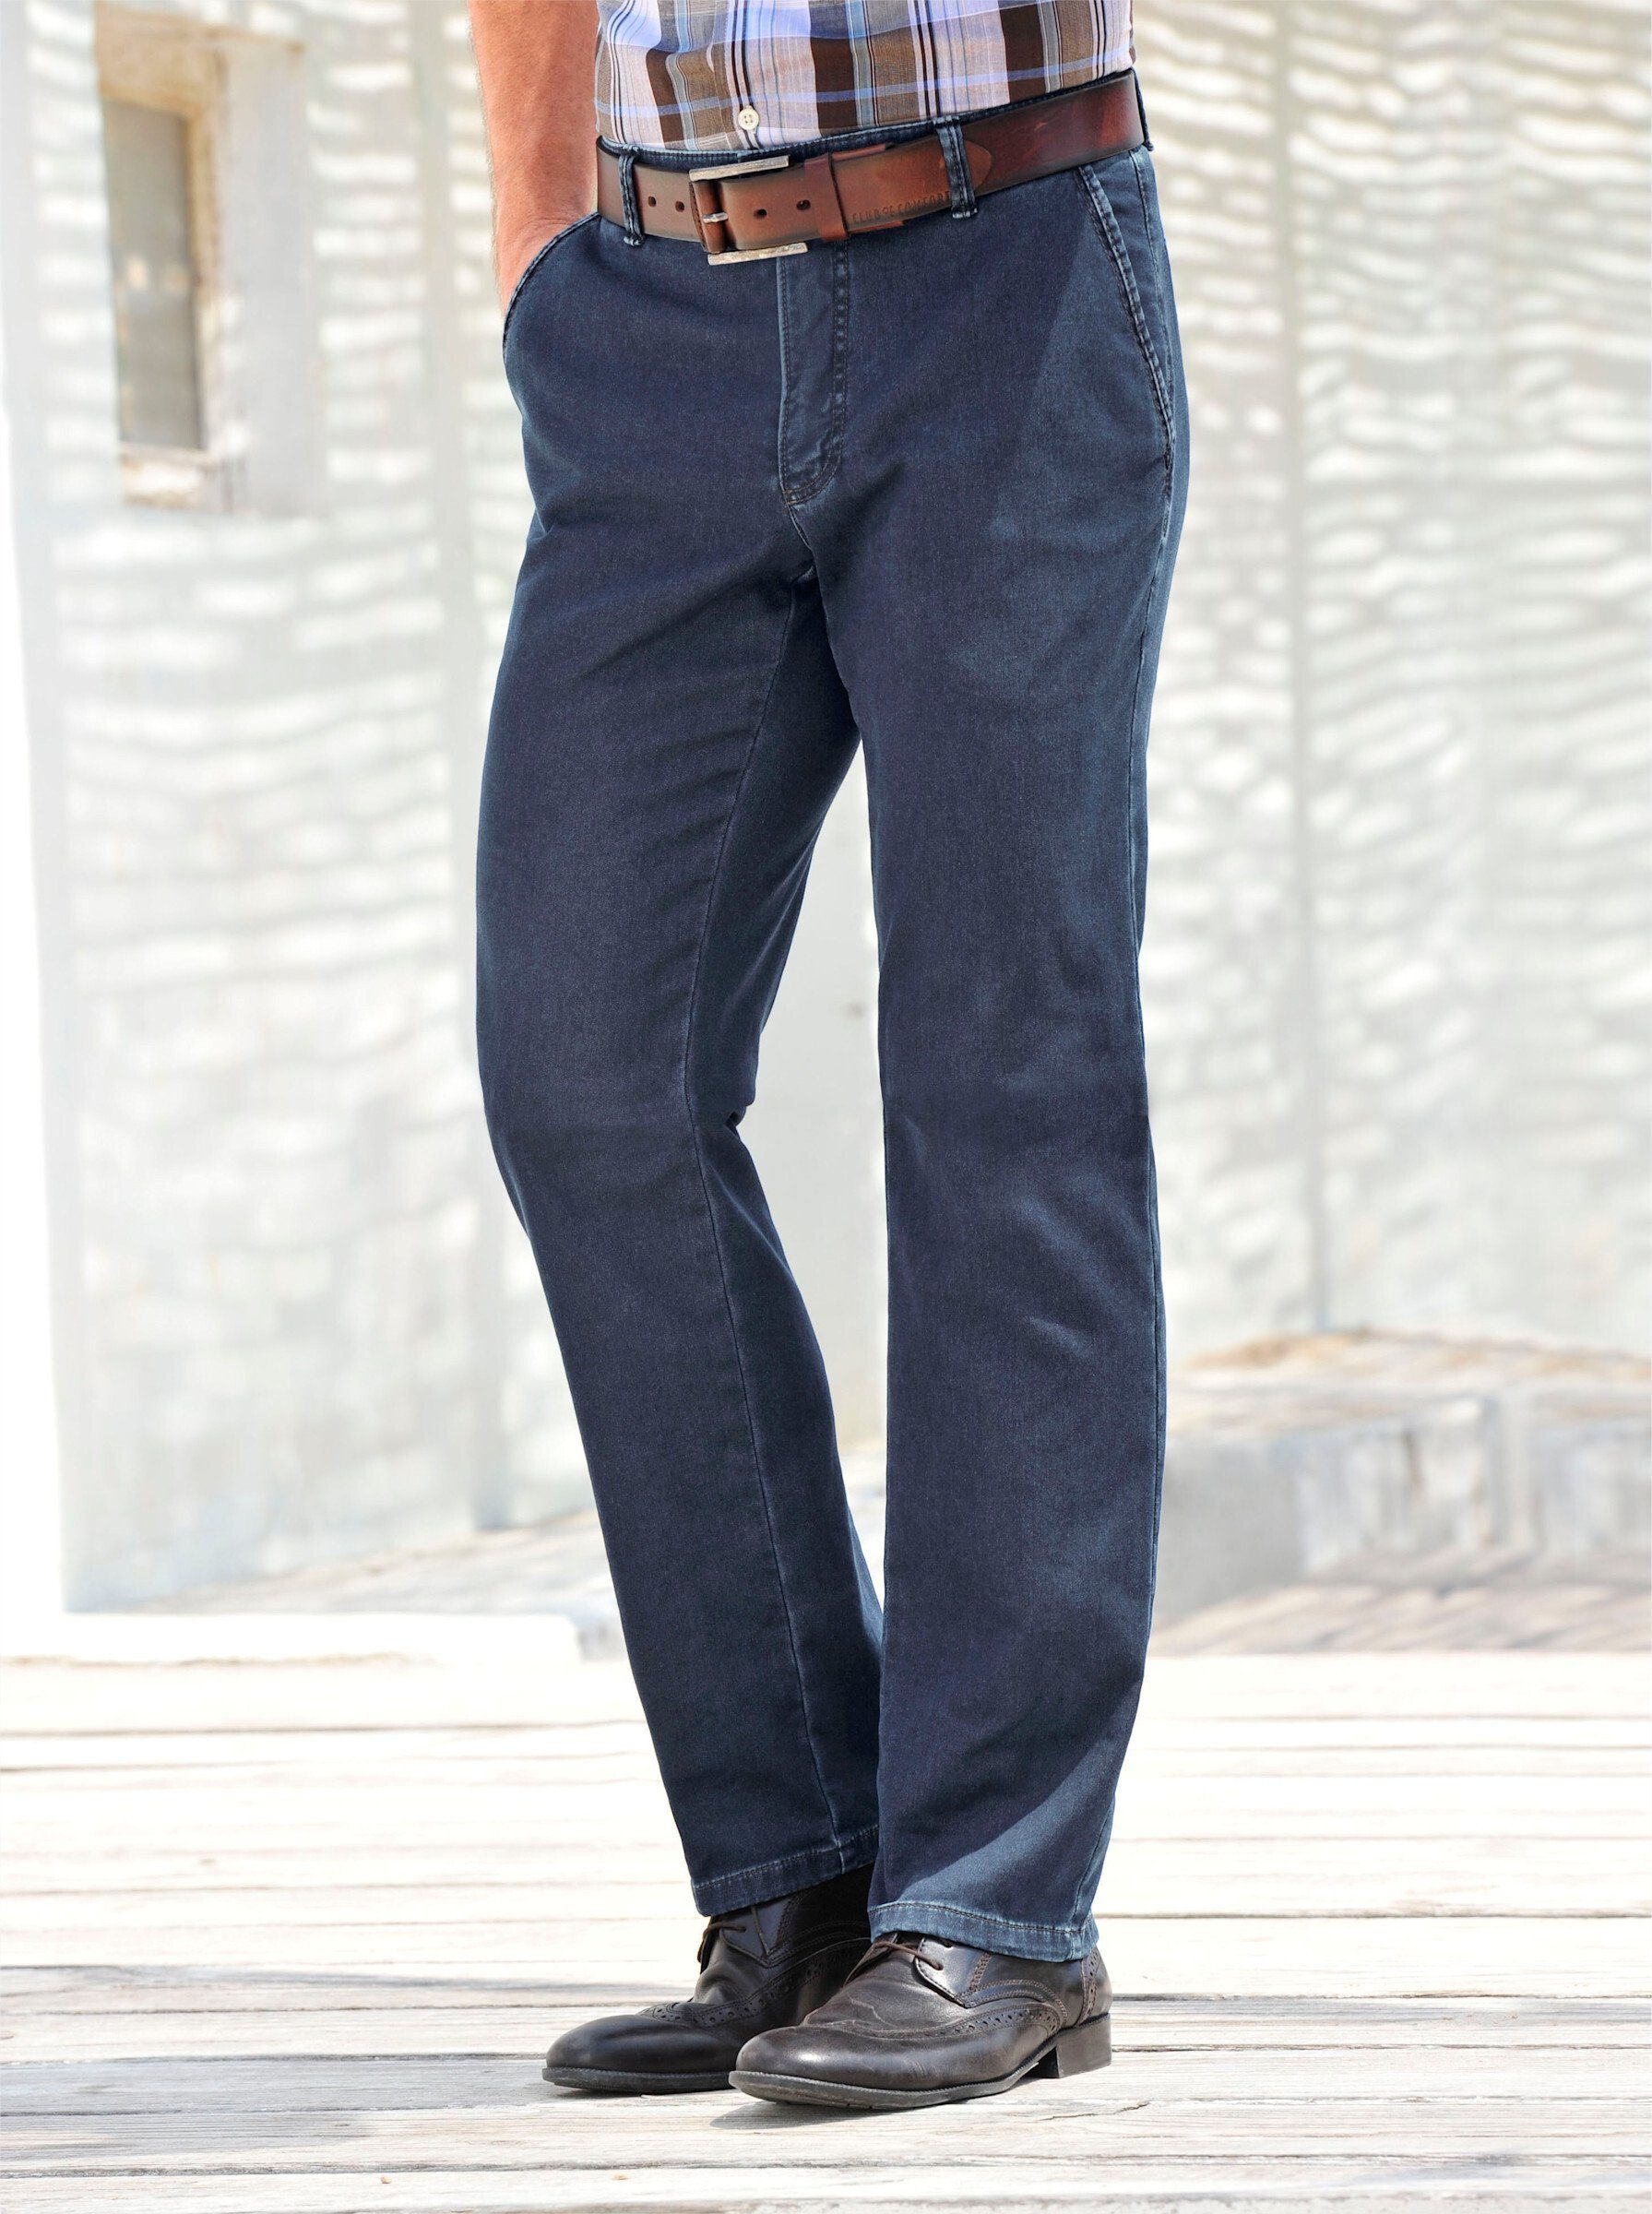 of Bequeme Club Comfort Jeans